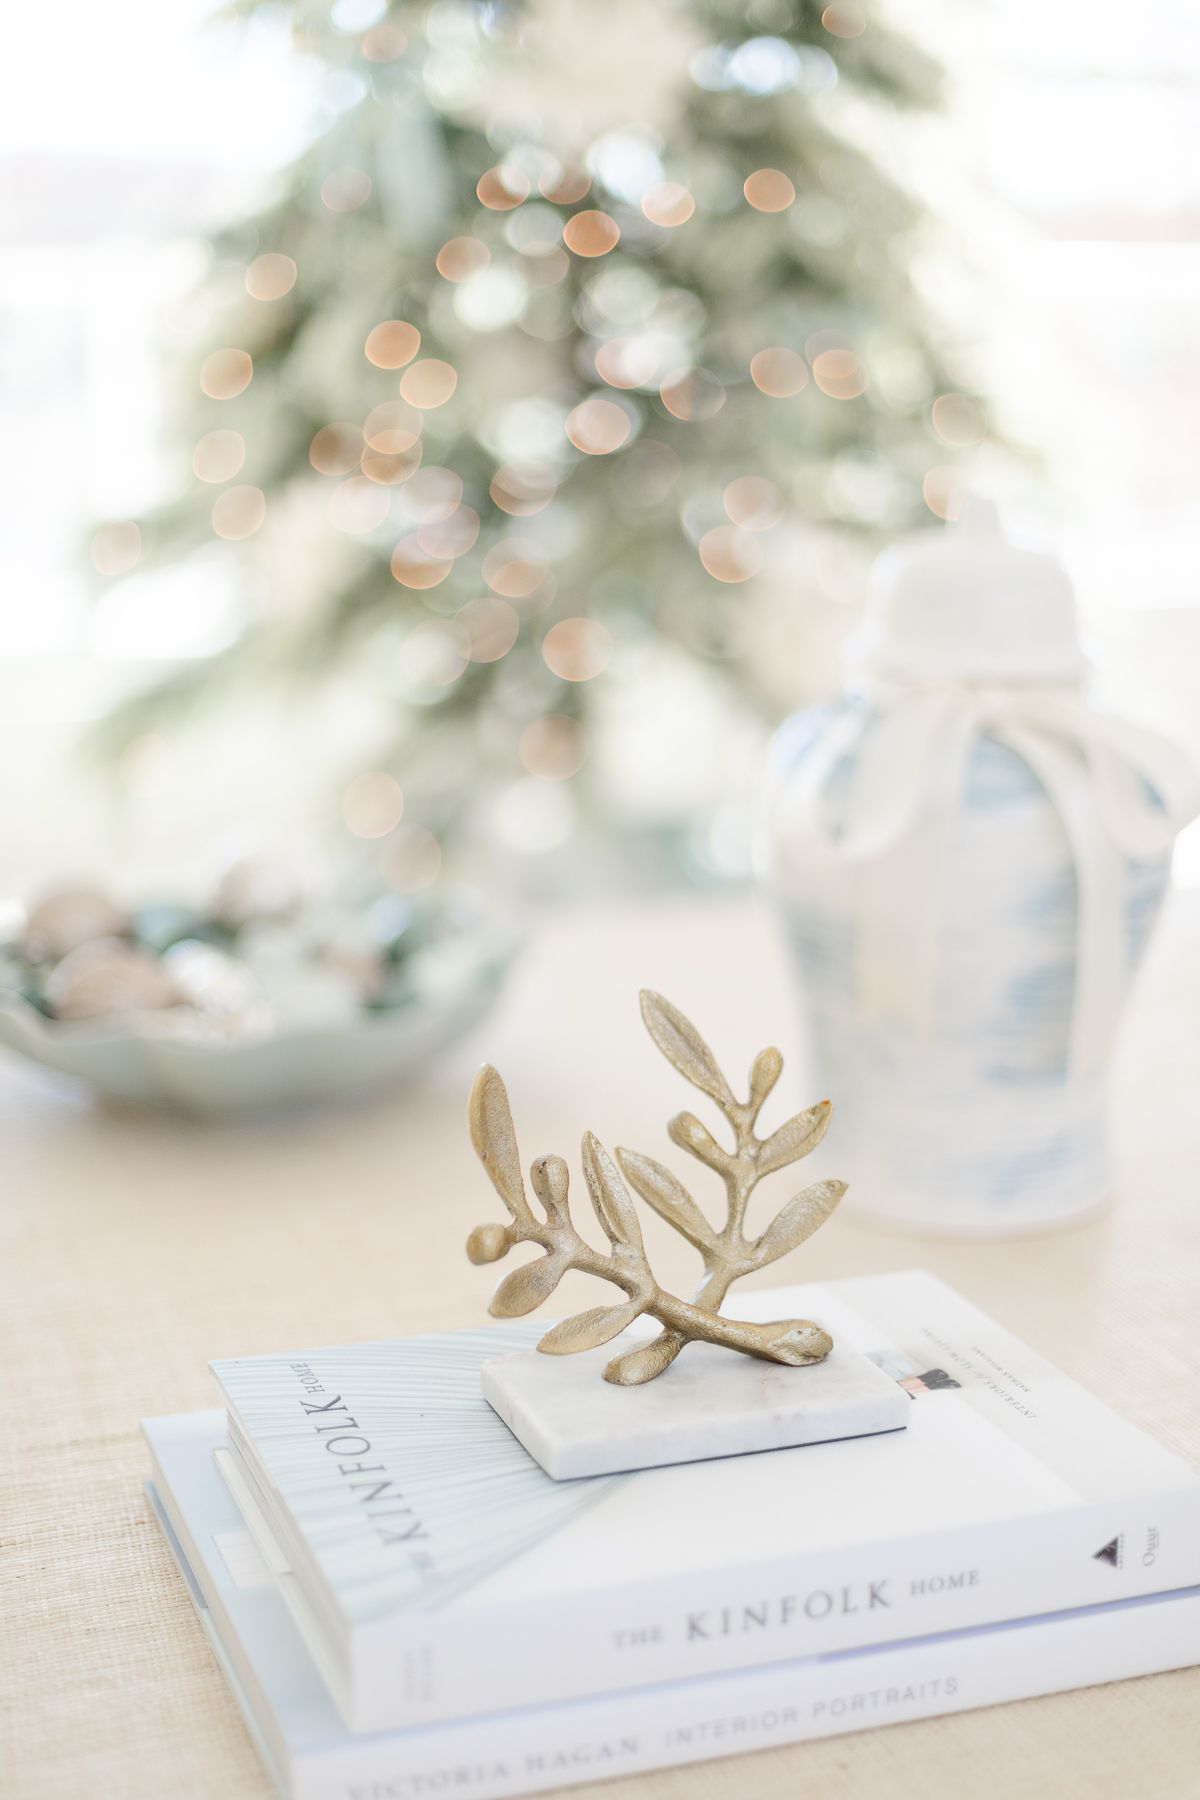 A brass mistletoe accent on a stack of books with a coastal Christmas tree in the background.